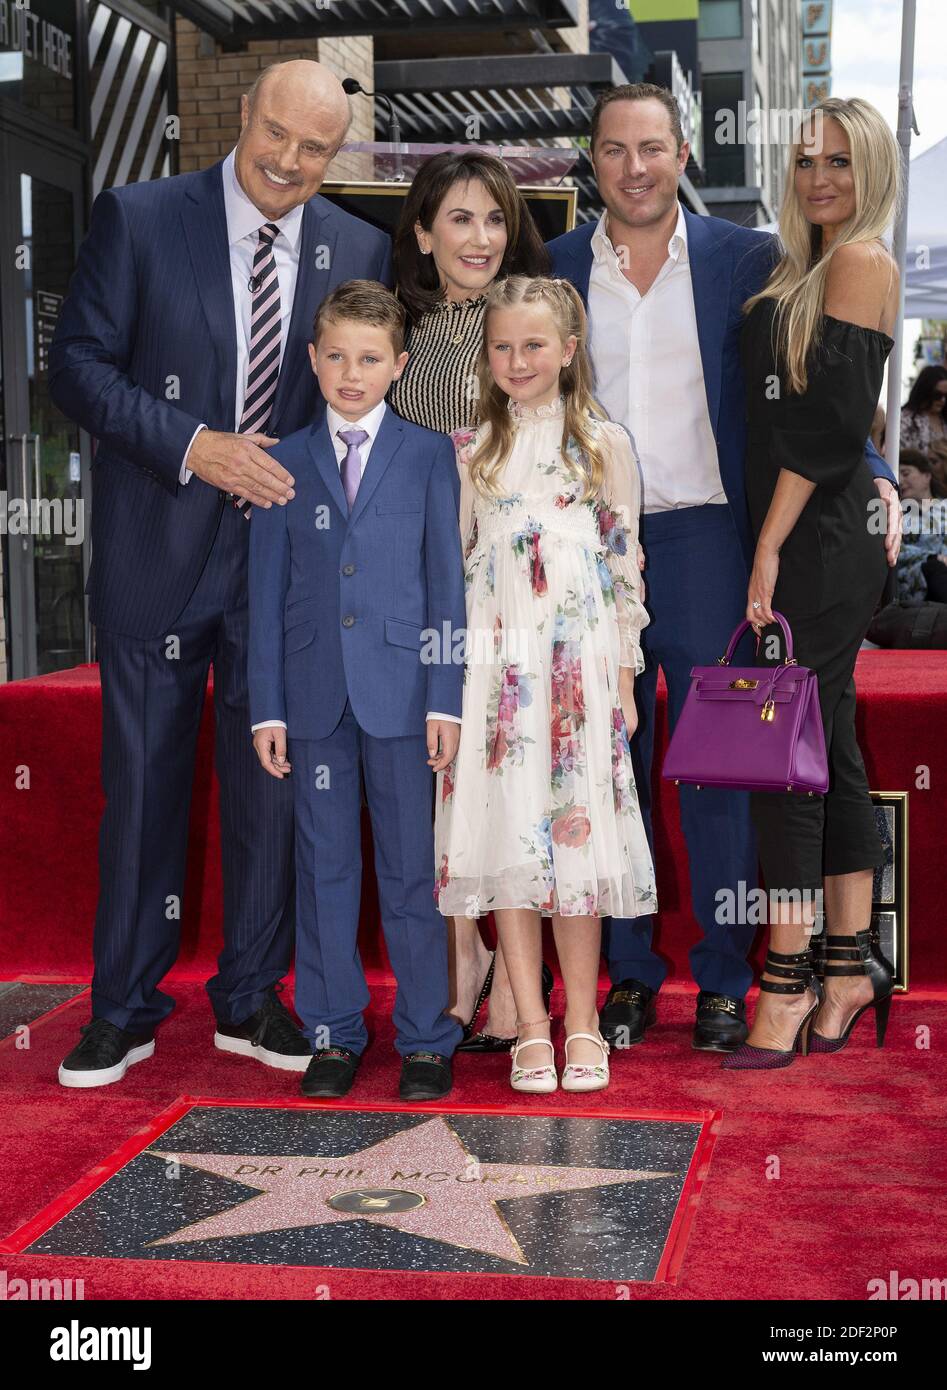 Dr Phil family attends the ceremony honoring Dr. Phill McGraw with a star on The Hollywood Walk Of Fame on February 21, 2020 in Los Angeles, CA, USA. Photo by Lionel Hahn/ABACAPRESS.COM Stock Photo